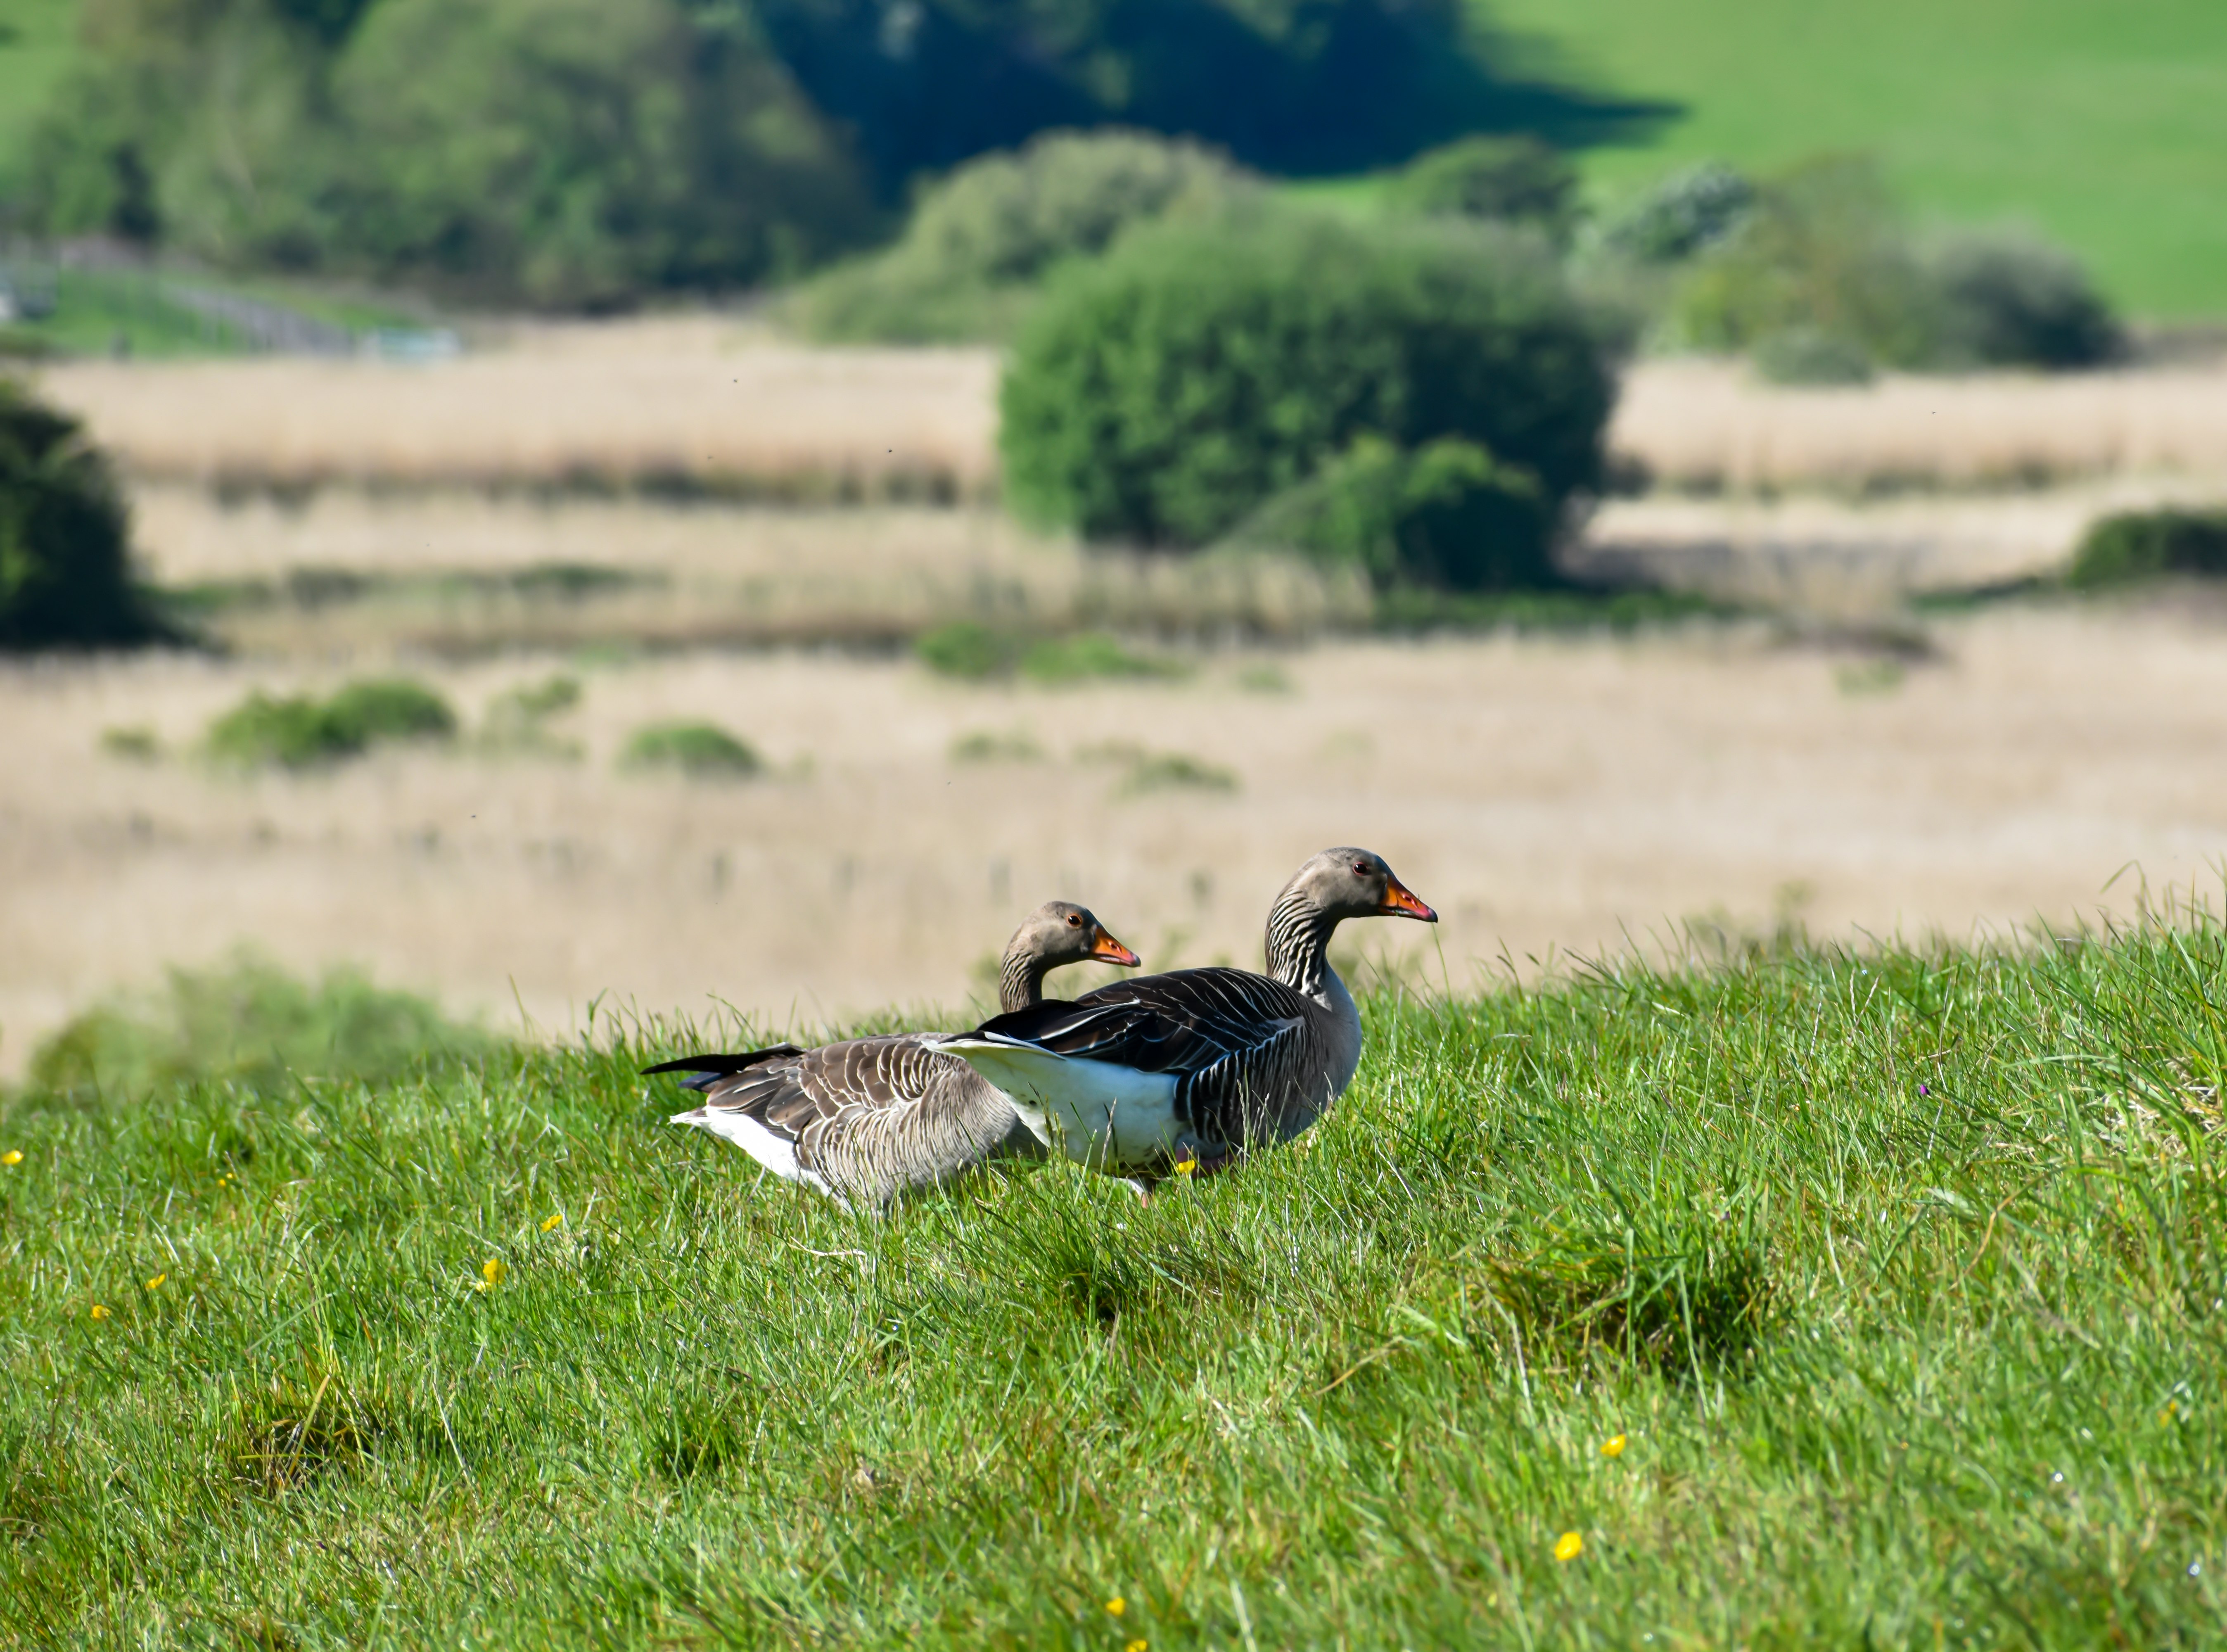 black and white duck on green grass field during daytime